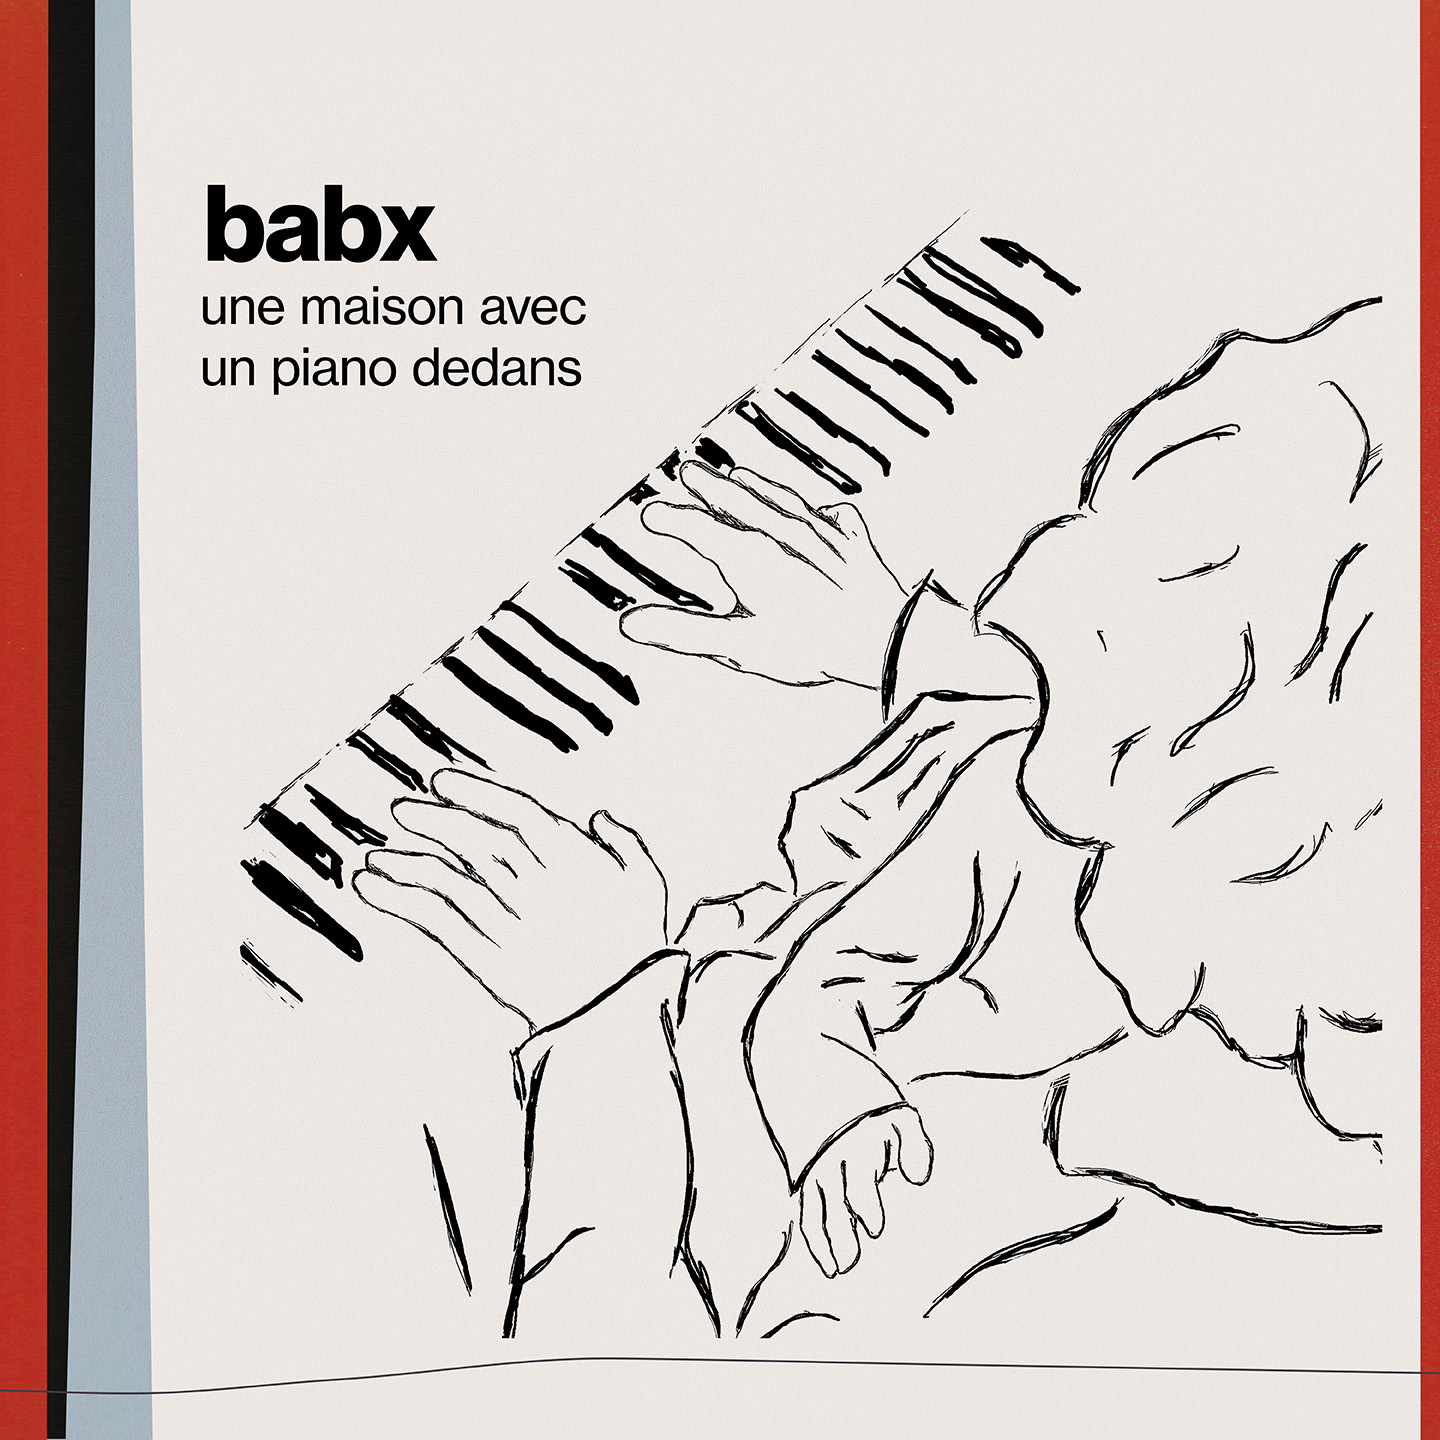 babx-a-house-with-a-piano-inside